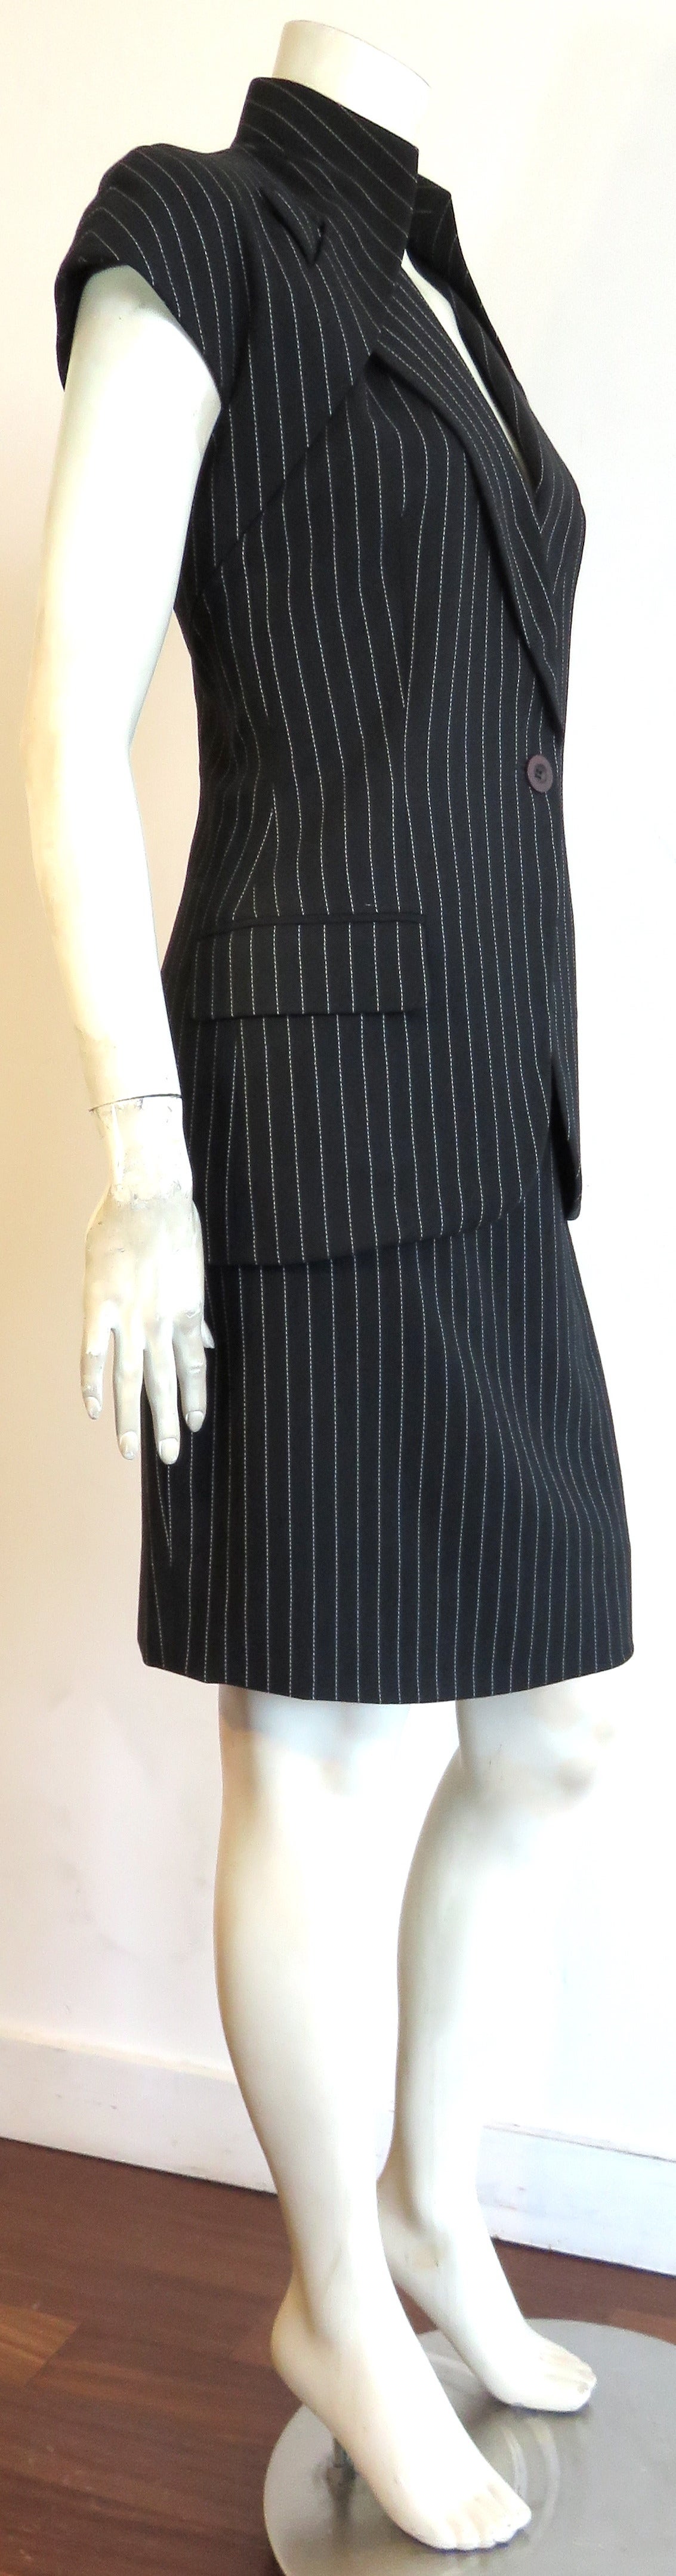 Women's 1998 GIVENCHY COUTURE by ALEXANDER McQUEEN Pinstripe skirt suit For Sale